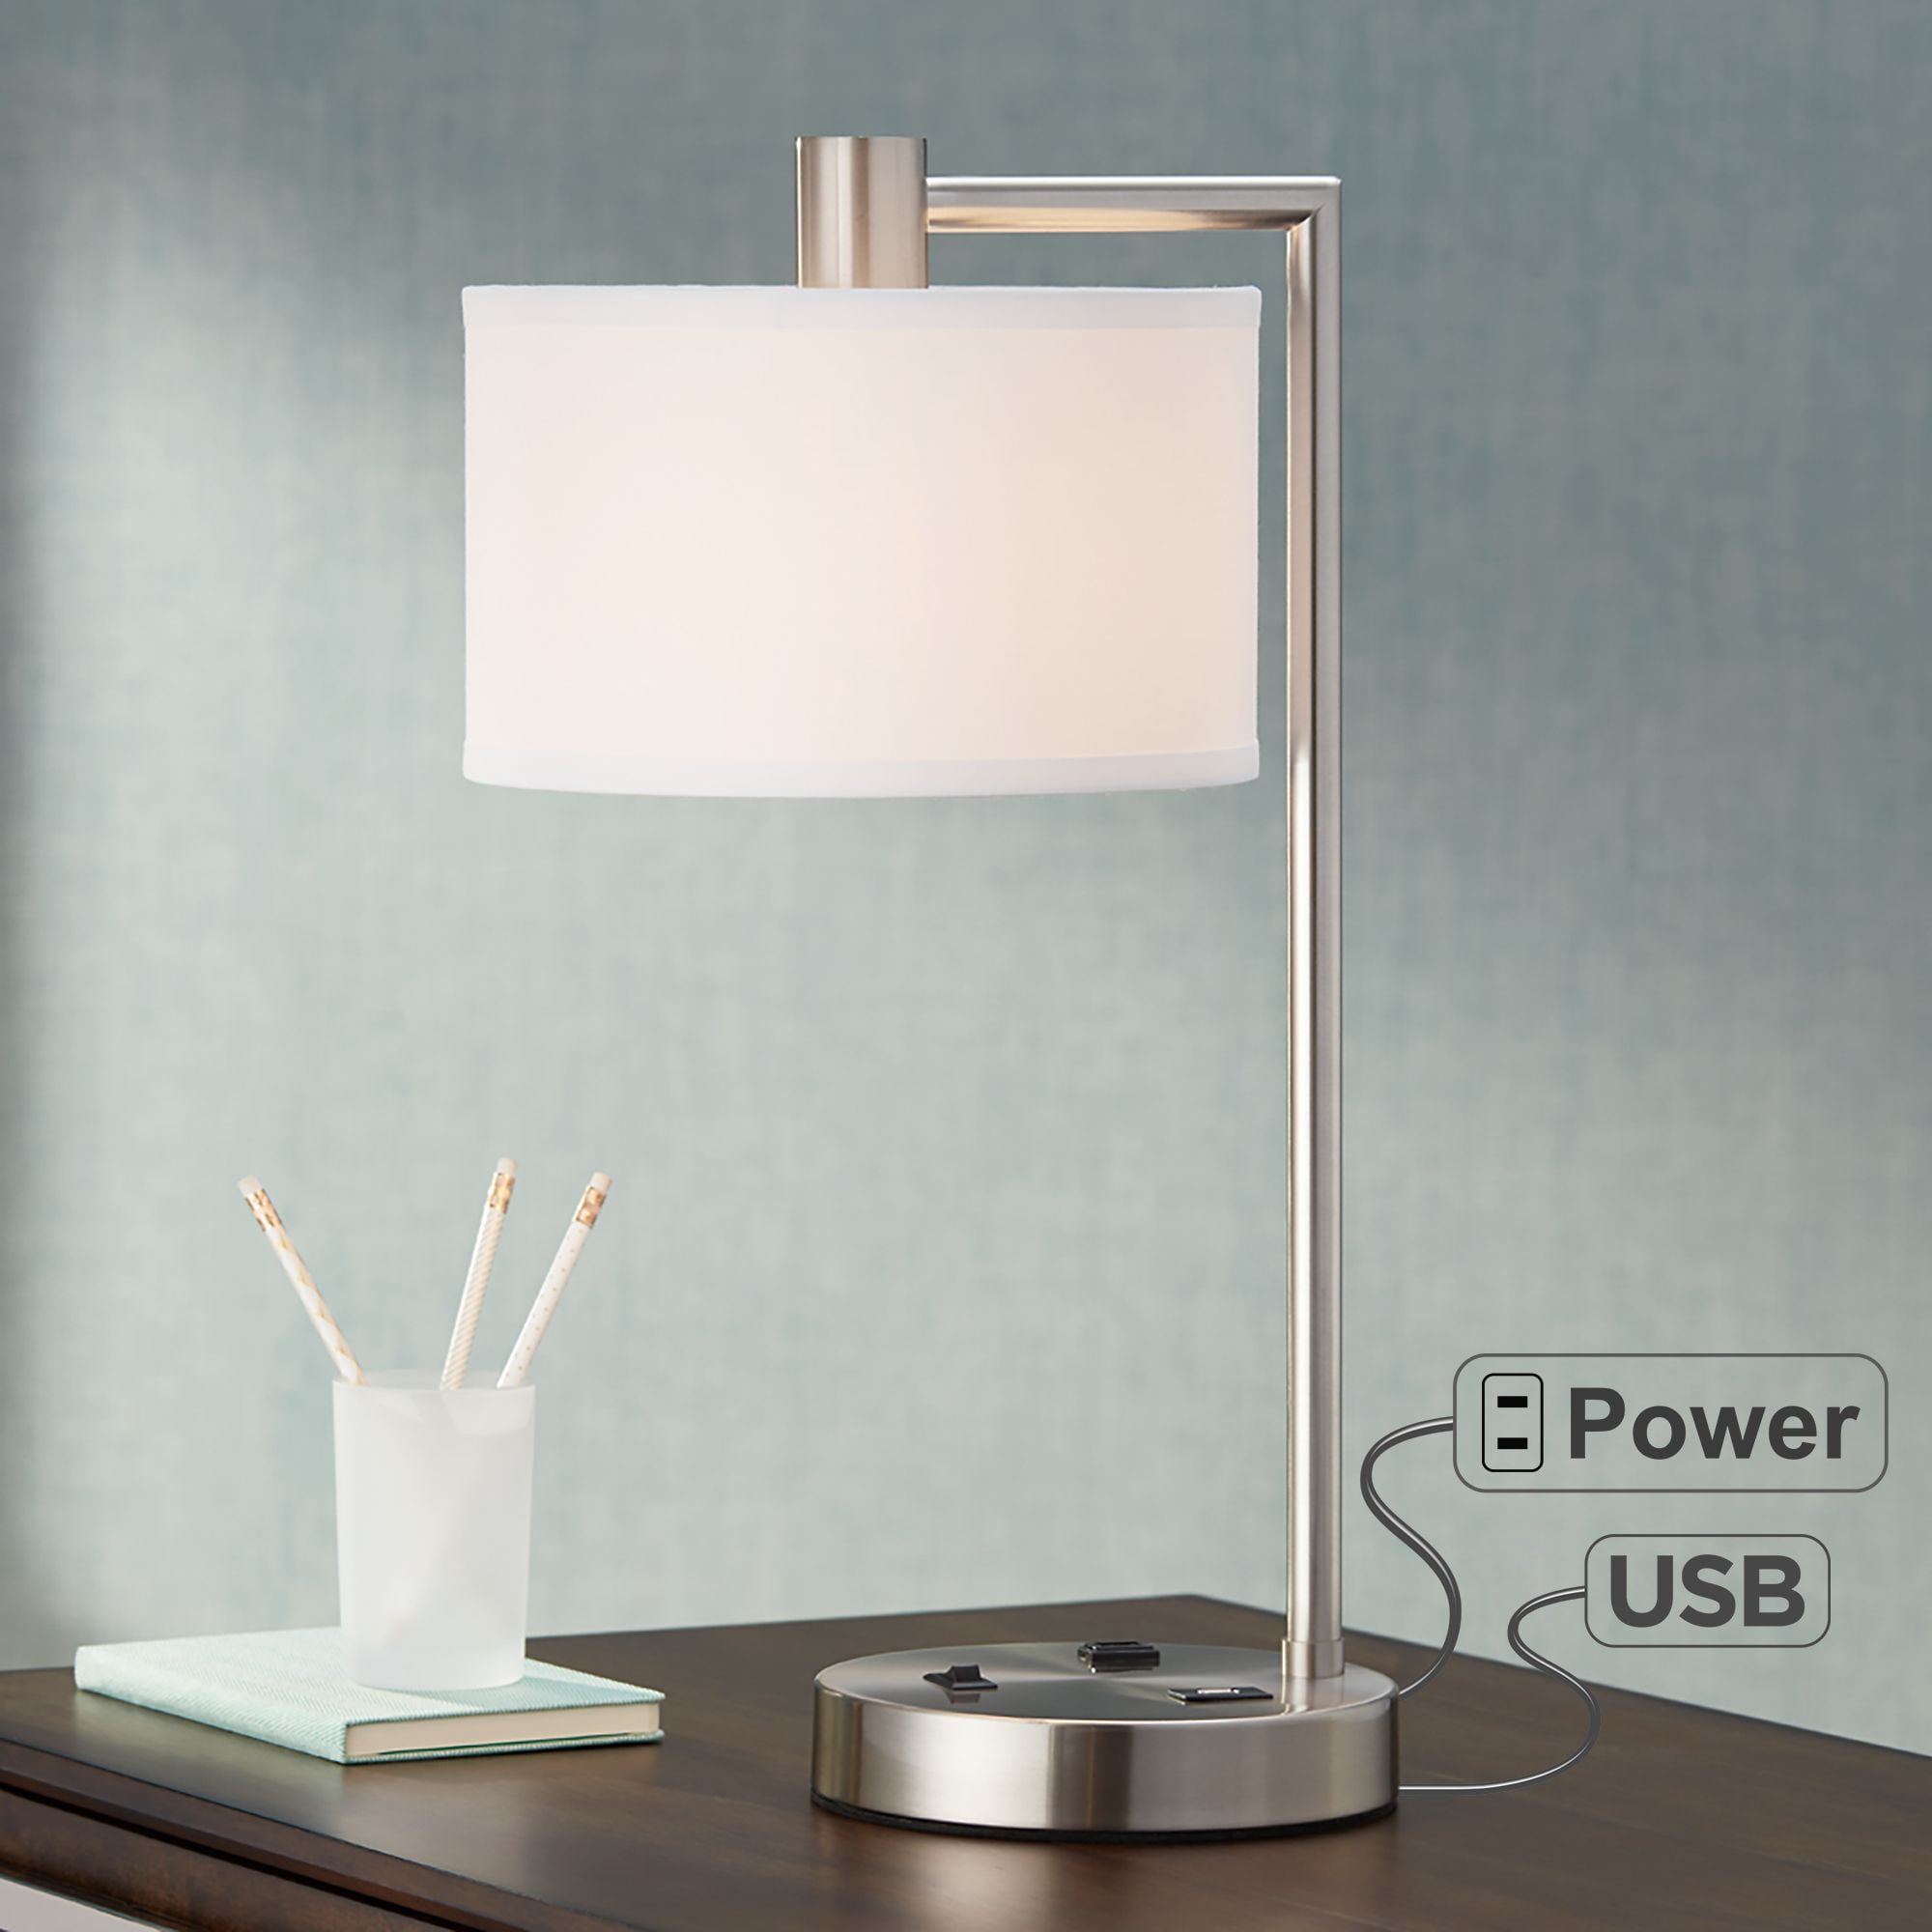 table lamps with usb and outlet